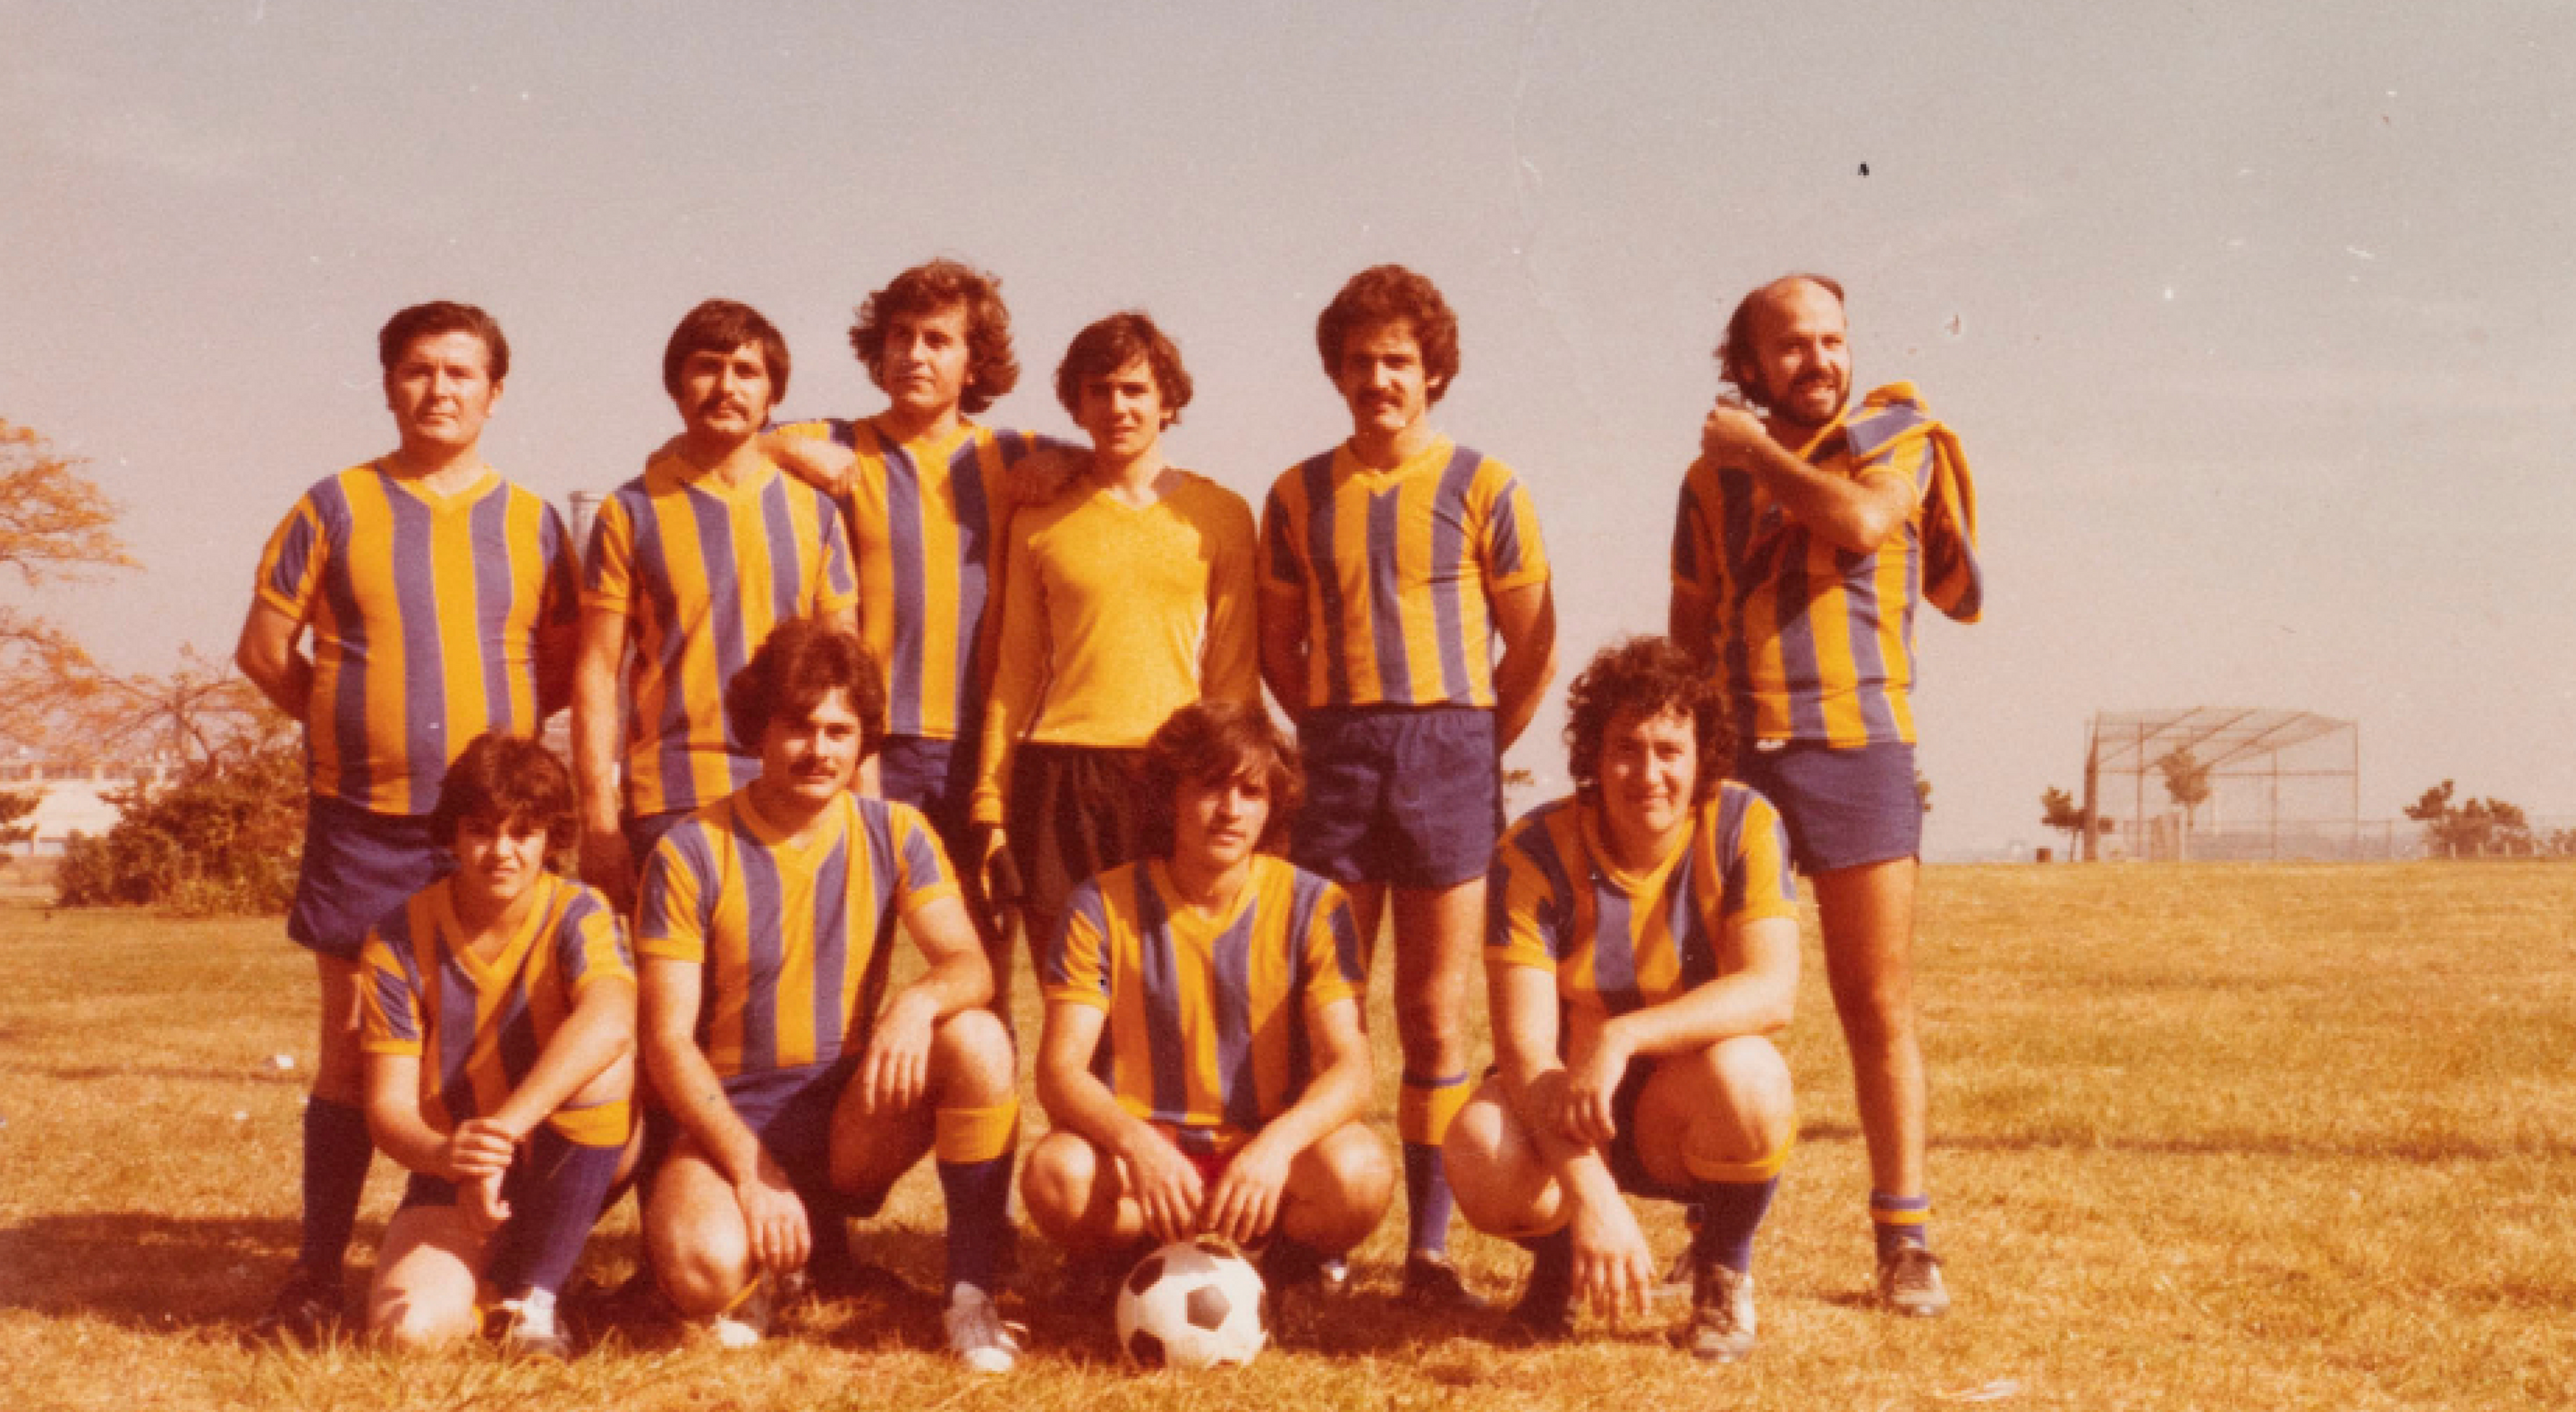 Mens soccer team posing for photo on a field